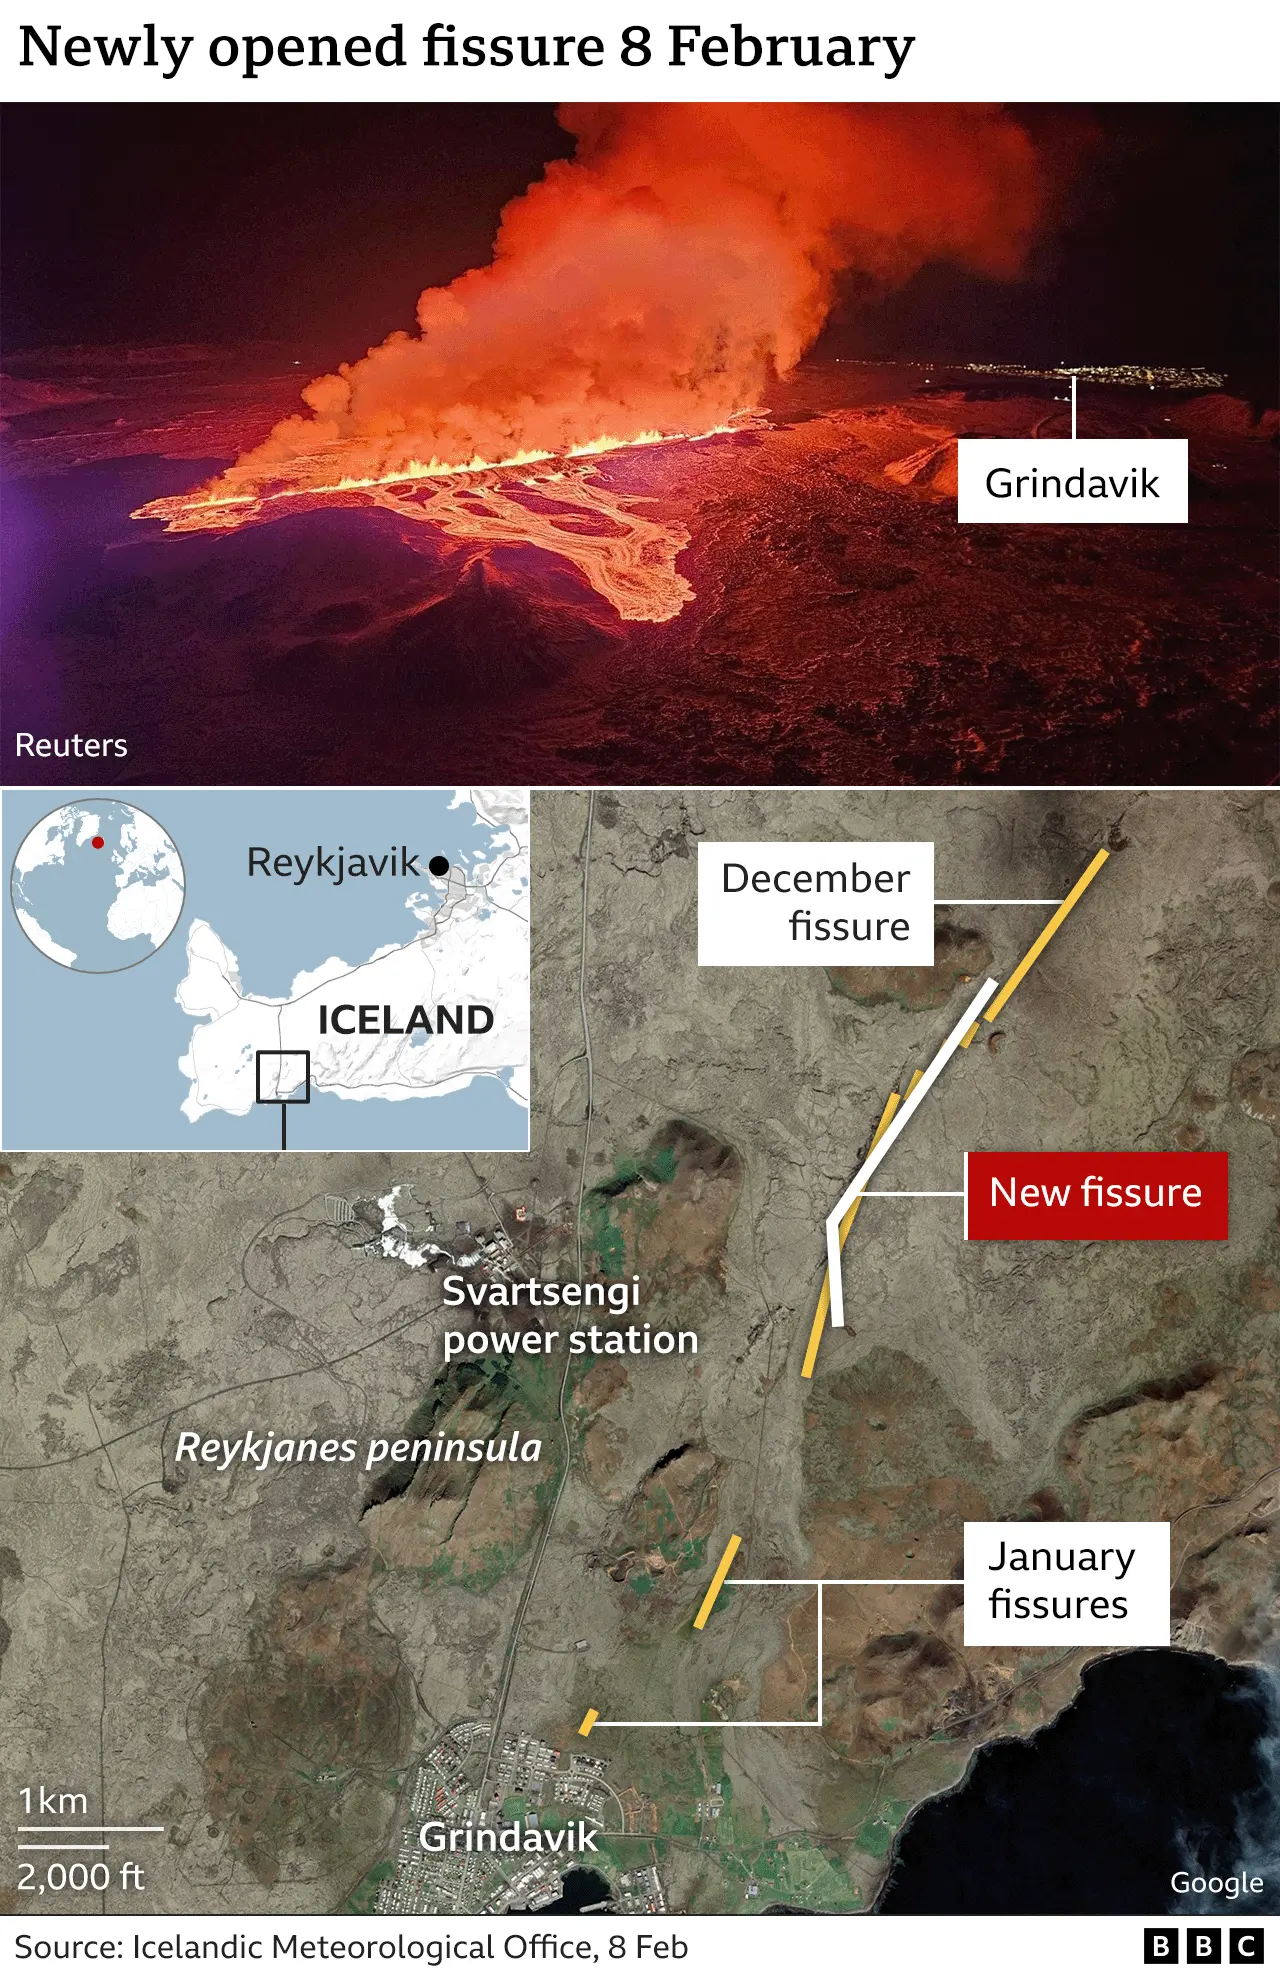 A composite graphic from the BBC with a satellite image and aerial photo showing how new fissures opened on Iceland's Reykjanes Peninsula in December and January.